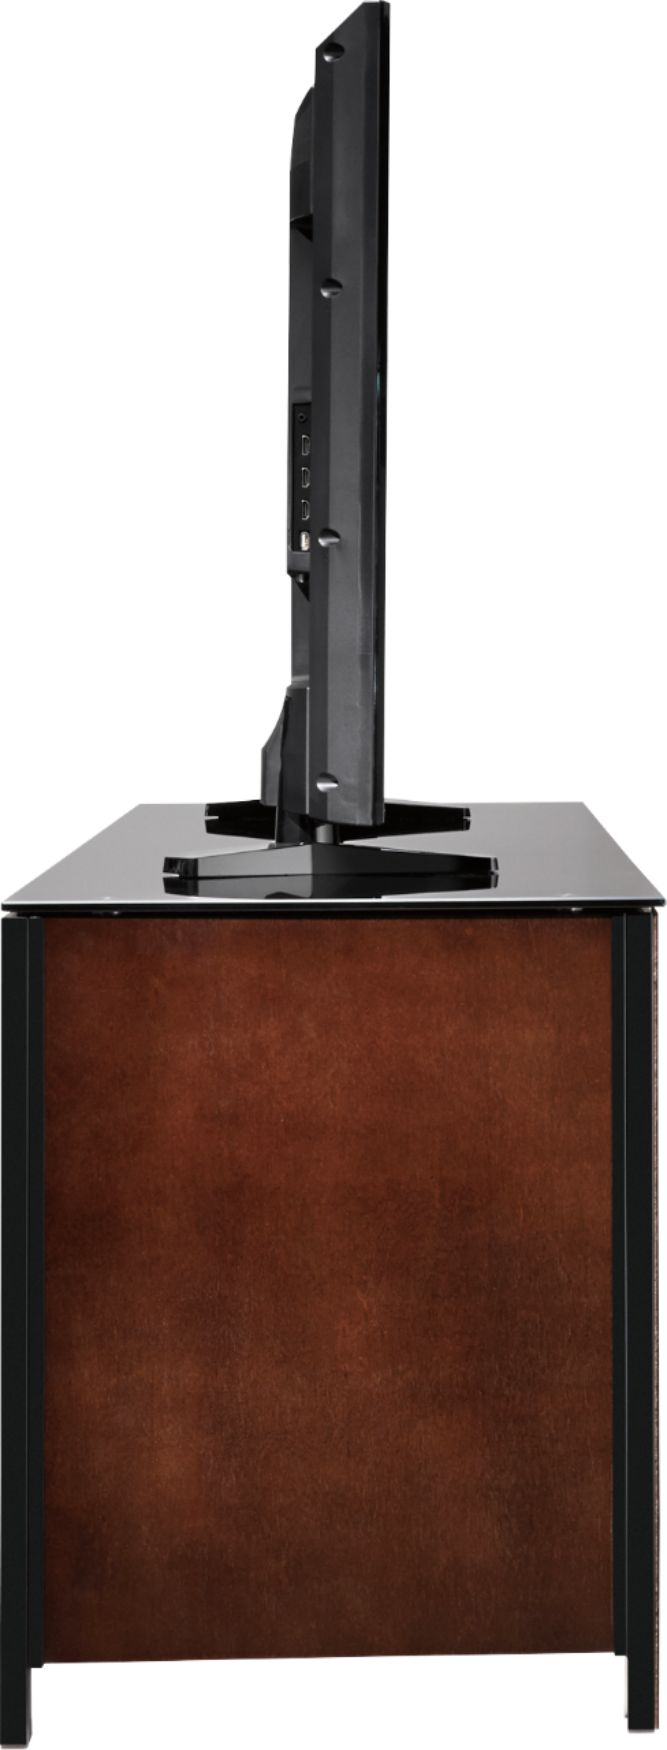 Insignia™ TV Stand for Most Flat-Panel TVs Up to 70